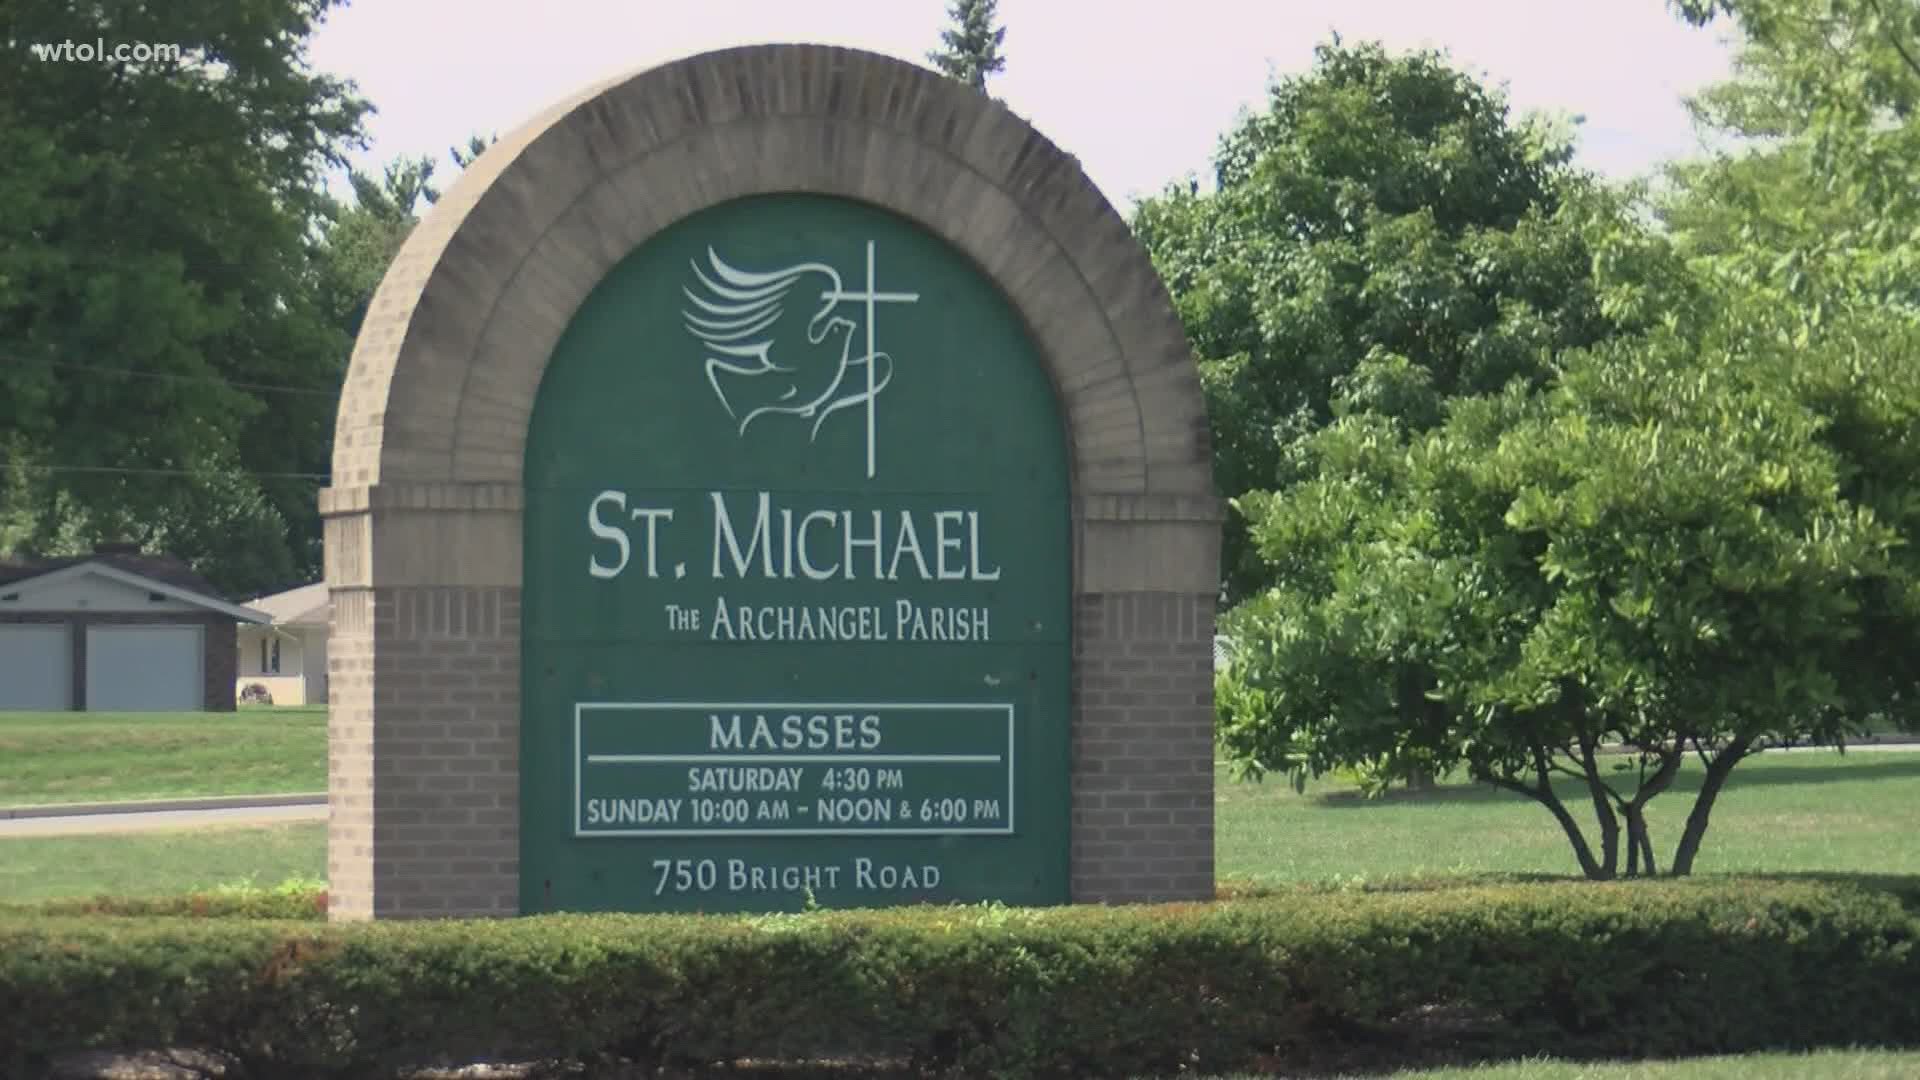 Father Michael Zacharias is a pastor at St. Michael the Archangel Parish in Findlay. Officials say he has been engaged in sexual conduct with minors since the 1990s.